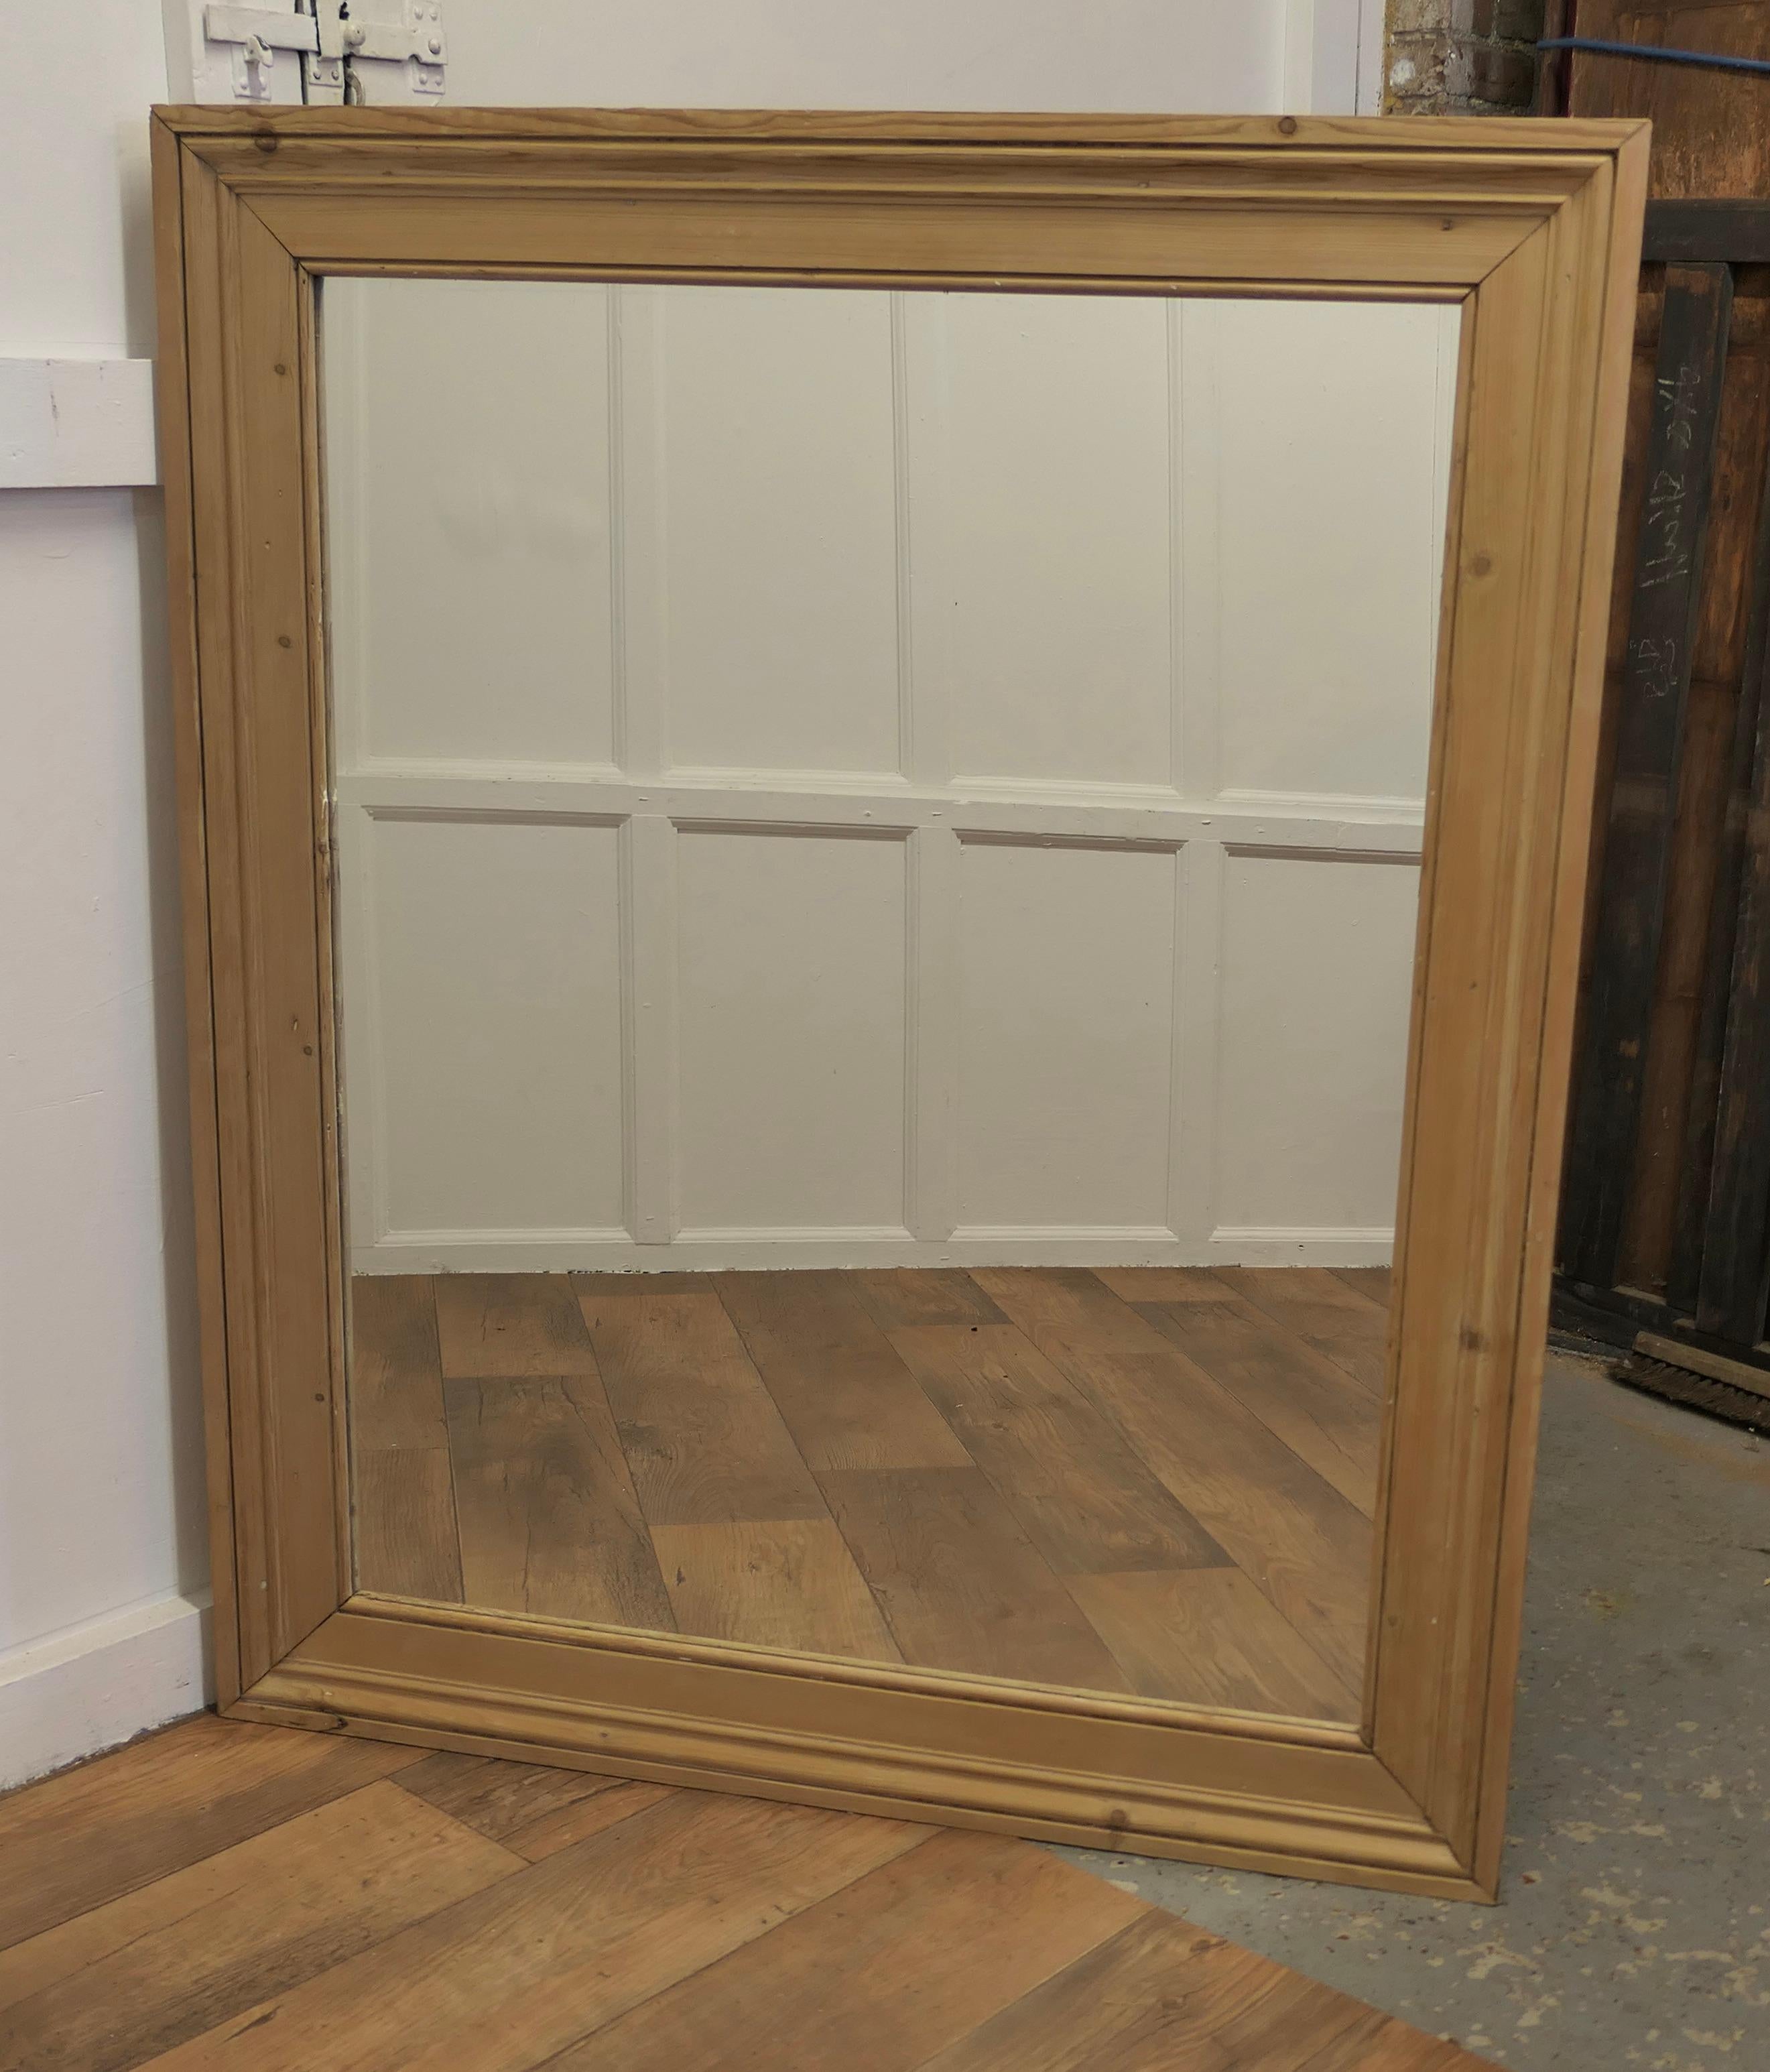 Large Reclaimed Pine Wall Mirror with a Moulded Pine Frame

The Mirror has a simple moulded 5” wide Pine Frame, this has a chunky attractive look 
The Glass is new, good large mirror will always add light and interest to a room and this one has